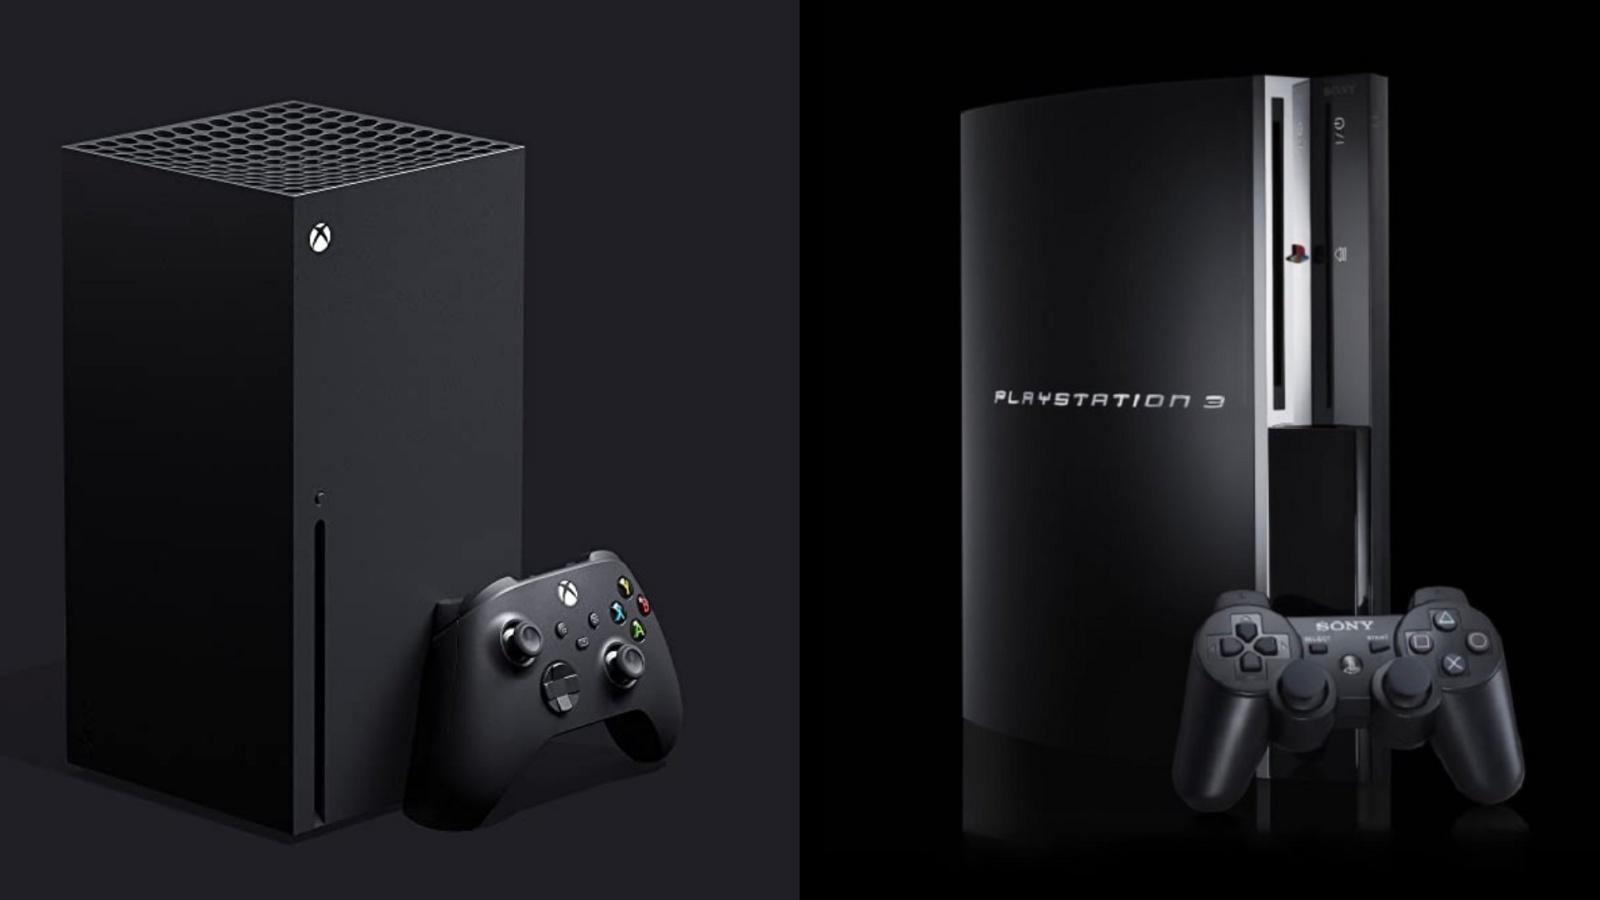 Xbox Series X/S 2022 Lineup: Starfield, Redfall, And More